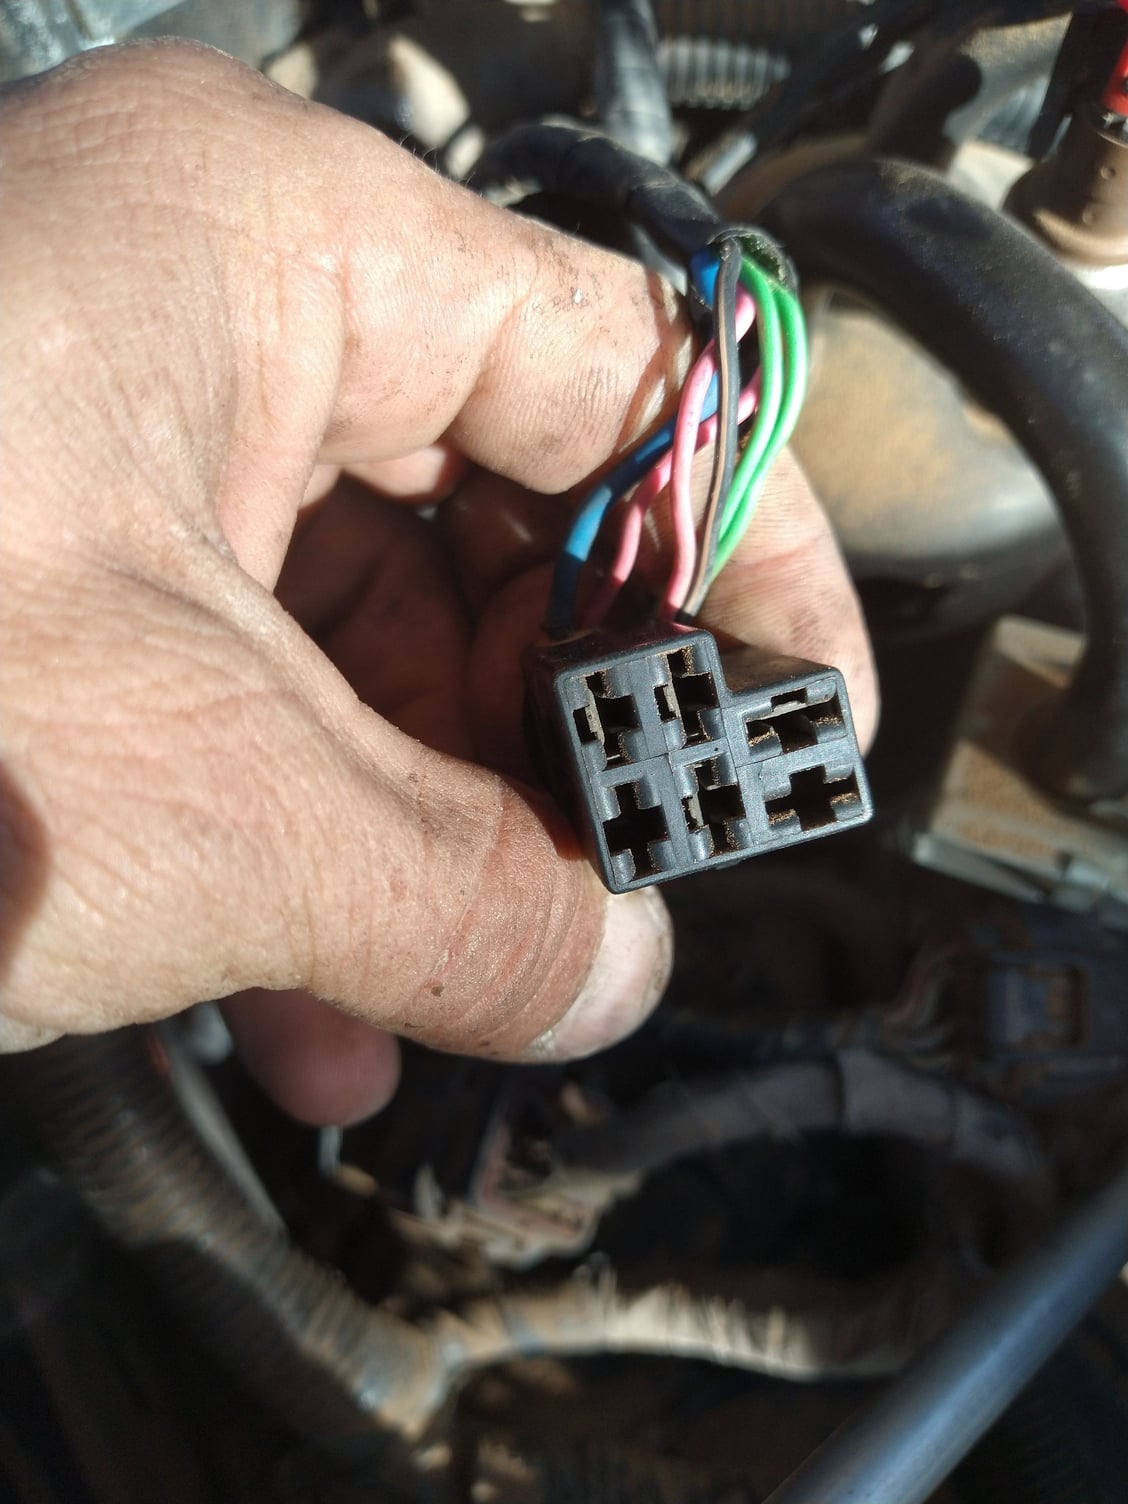 Multiple engine wiring harnesses clips not connected - DodgeForum.com